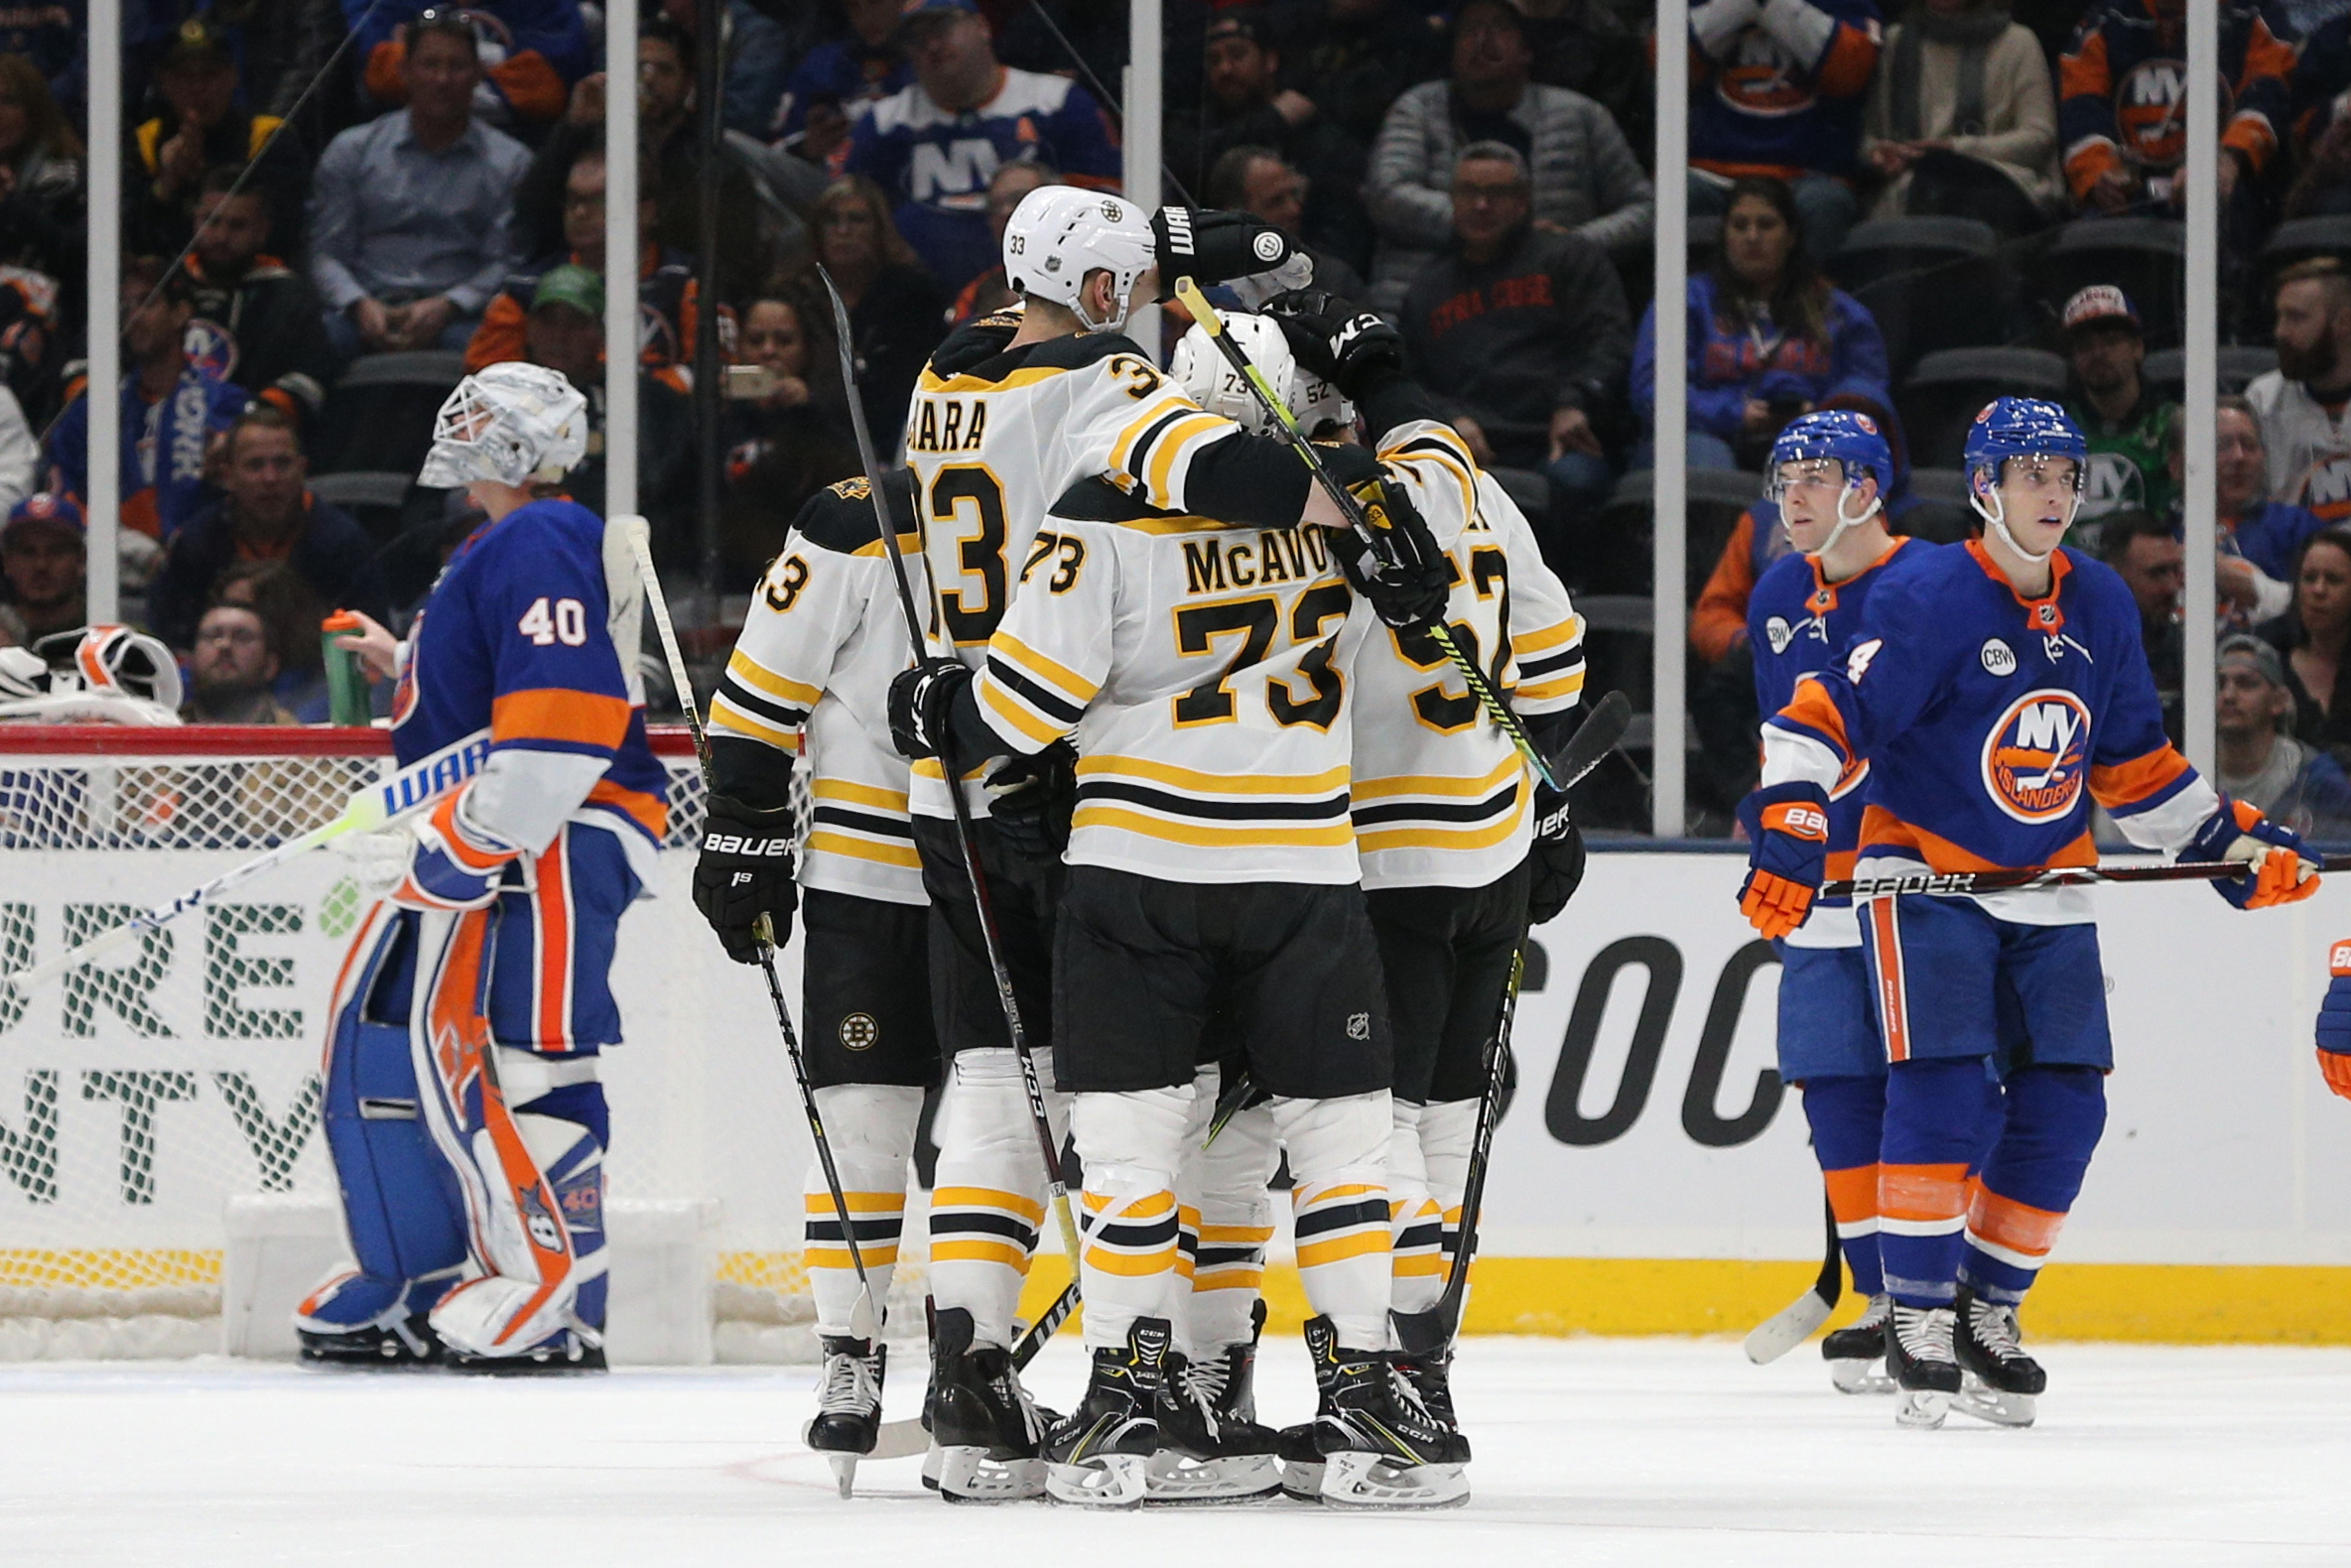 Mar 19, 2019; Uniondale, NY, USA; Boston Bruins center Sean Kuraly (52) celebrates with teammates after scoring a goal against New York Islanders goalie Robin Lehner (40) during the second period at Nassau Veterans Memorial Coliseum. Mandatory Credit: Brad Penner-USA TODAY Sports